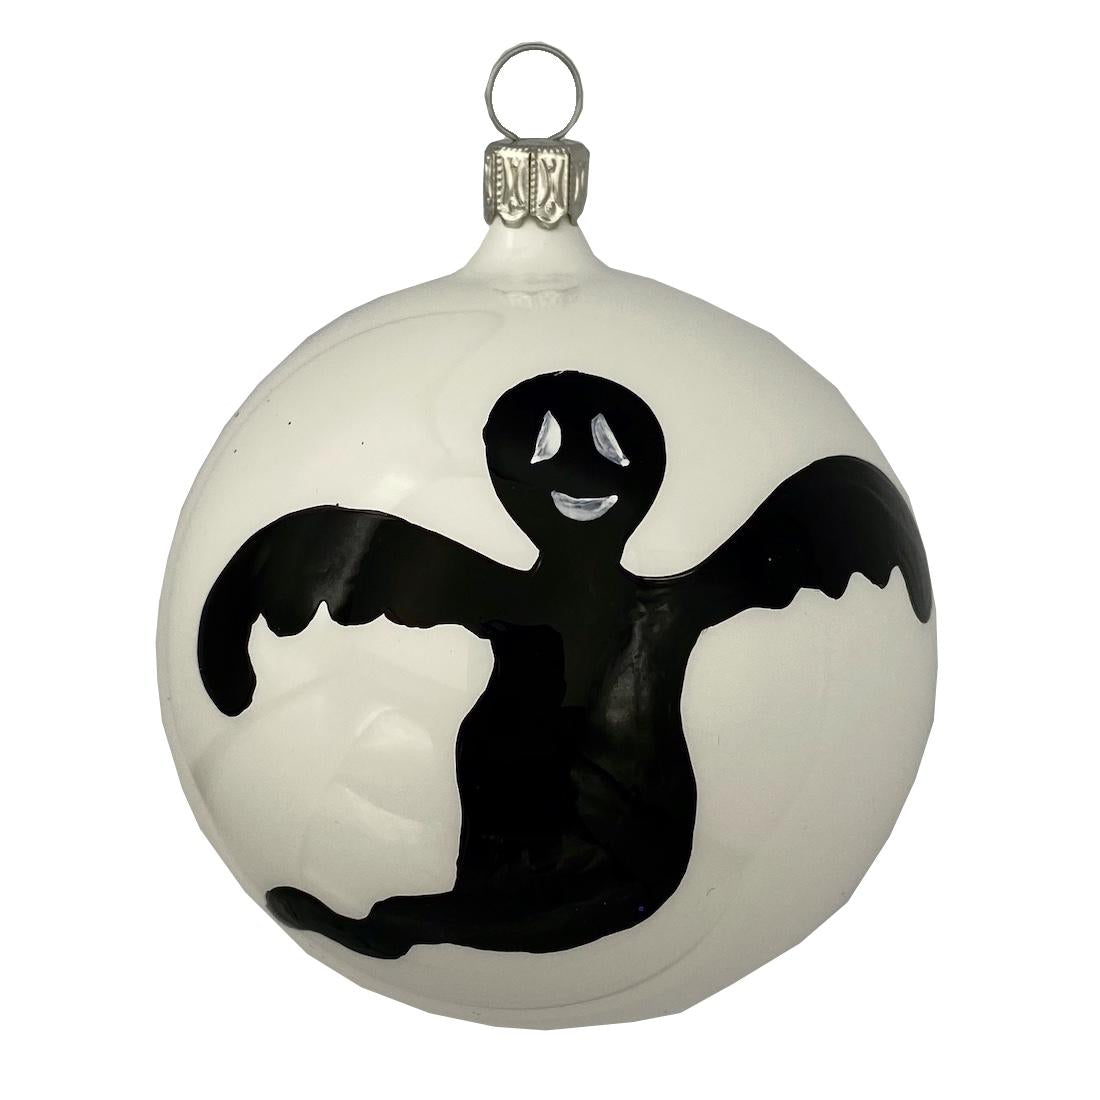 Ghost on Ball Ornament by Glas Bartholmes